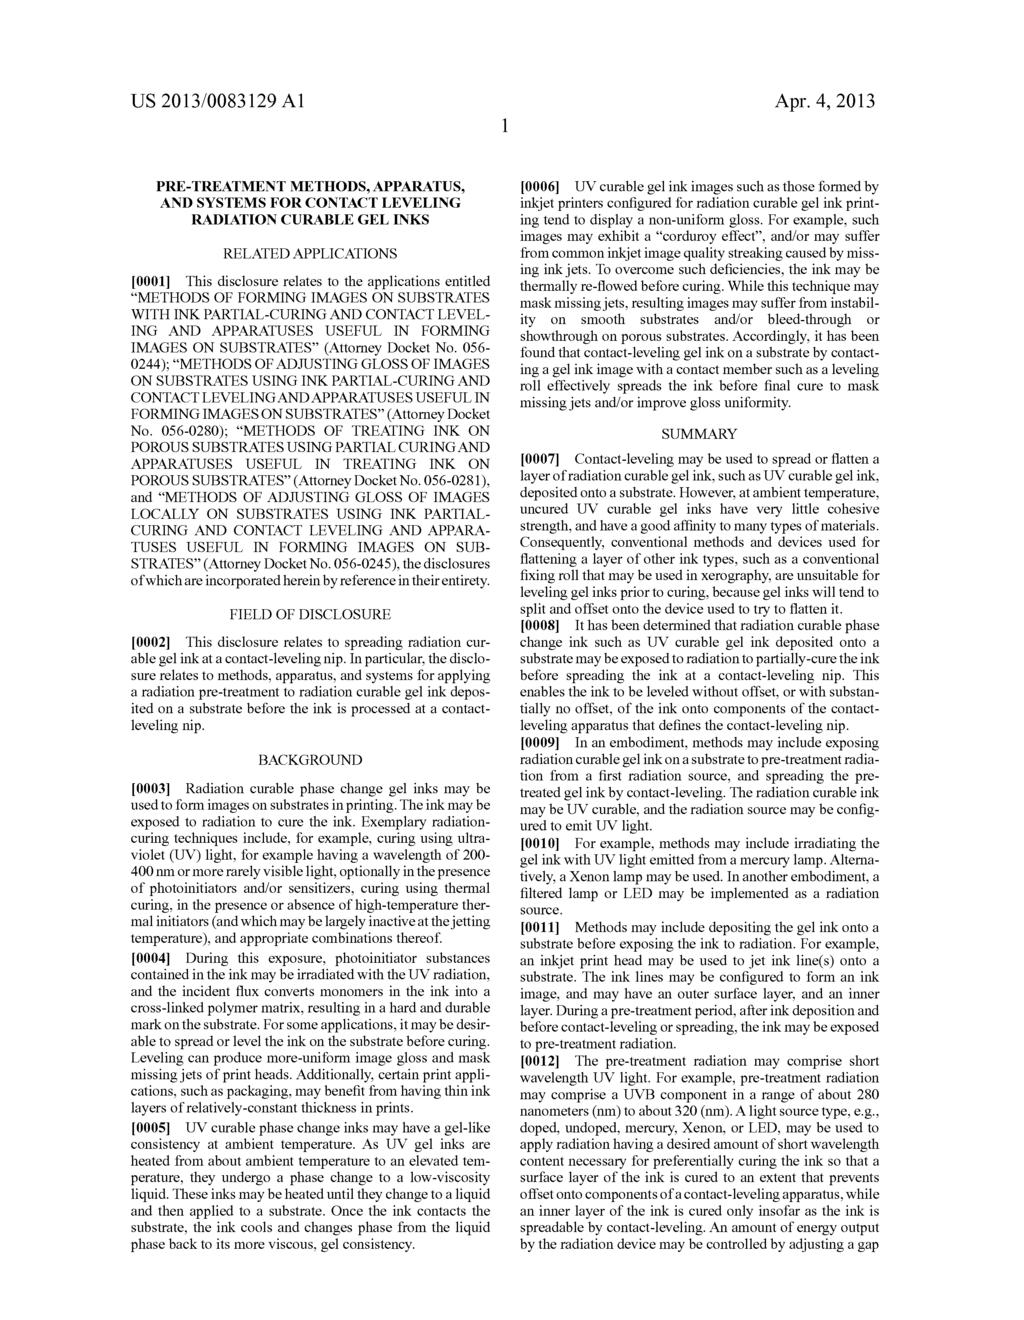 US 2013/0O83129 A1 Apr. 4, 2013 PRE-TREATMENT METHODS, APPARATUS, AND SYSTEMIS FOR CONTACT LEVELING RADATION CURABLE GELINKS RELATED APPLICATIONS 0001.